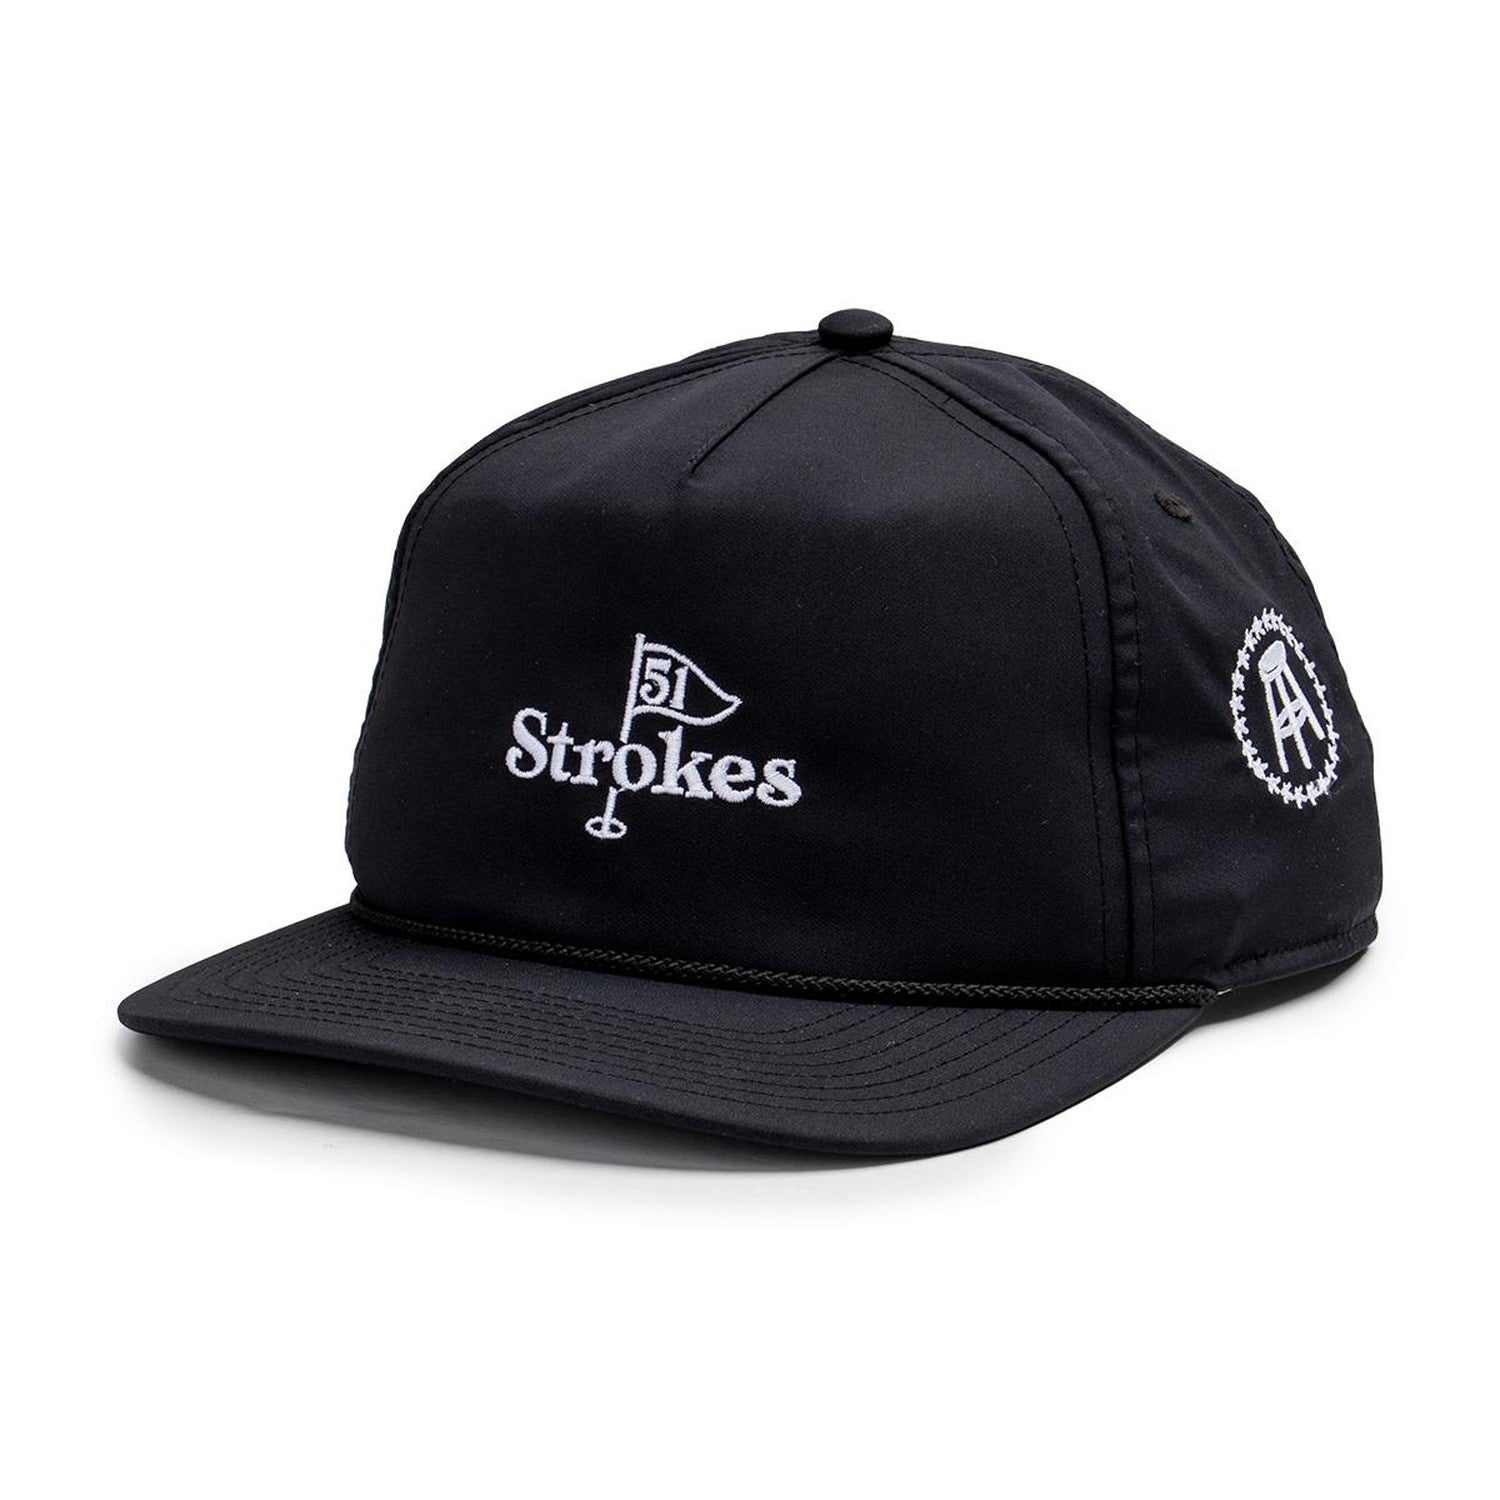 51 Strokes Imperial Rope Hat - 51 Strokes Hats & Merch – Barstool Sports